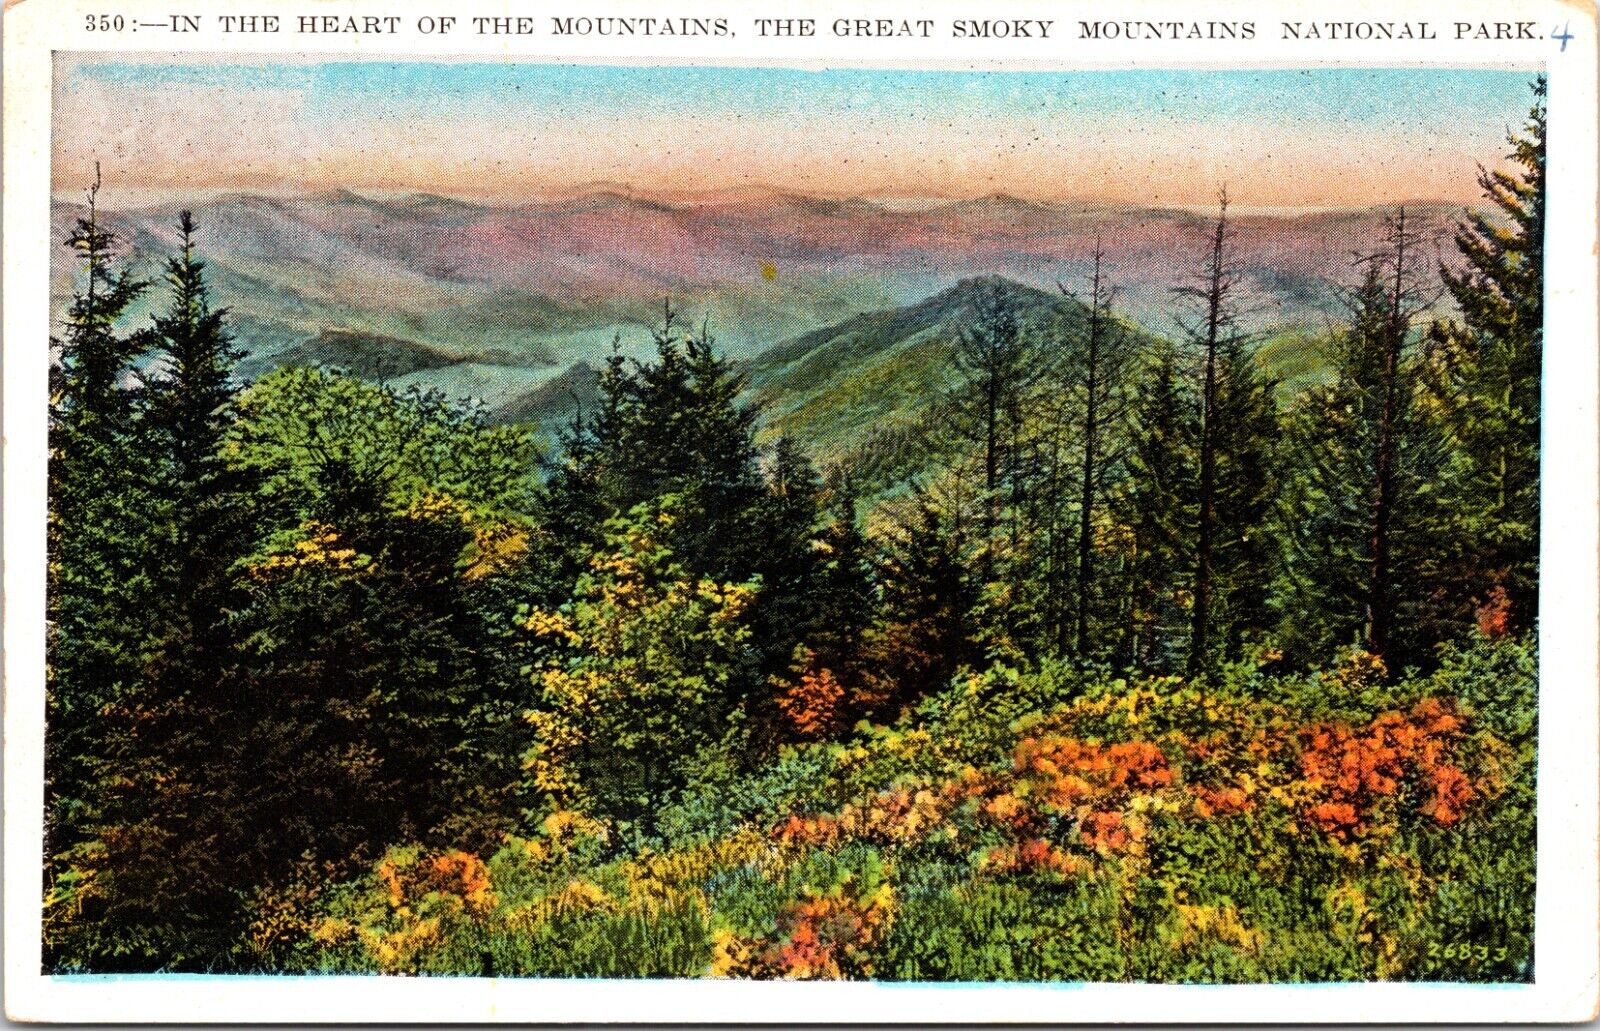 In The Heart of the Great Smoky Mountains National Park